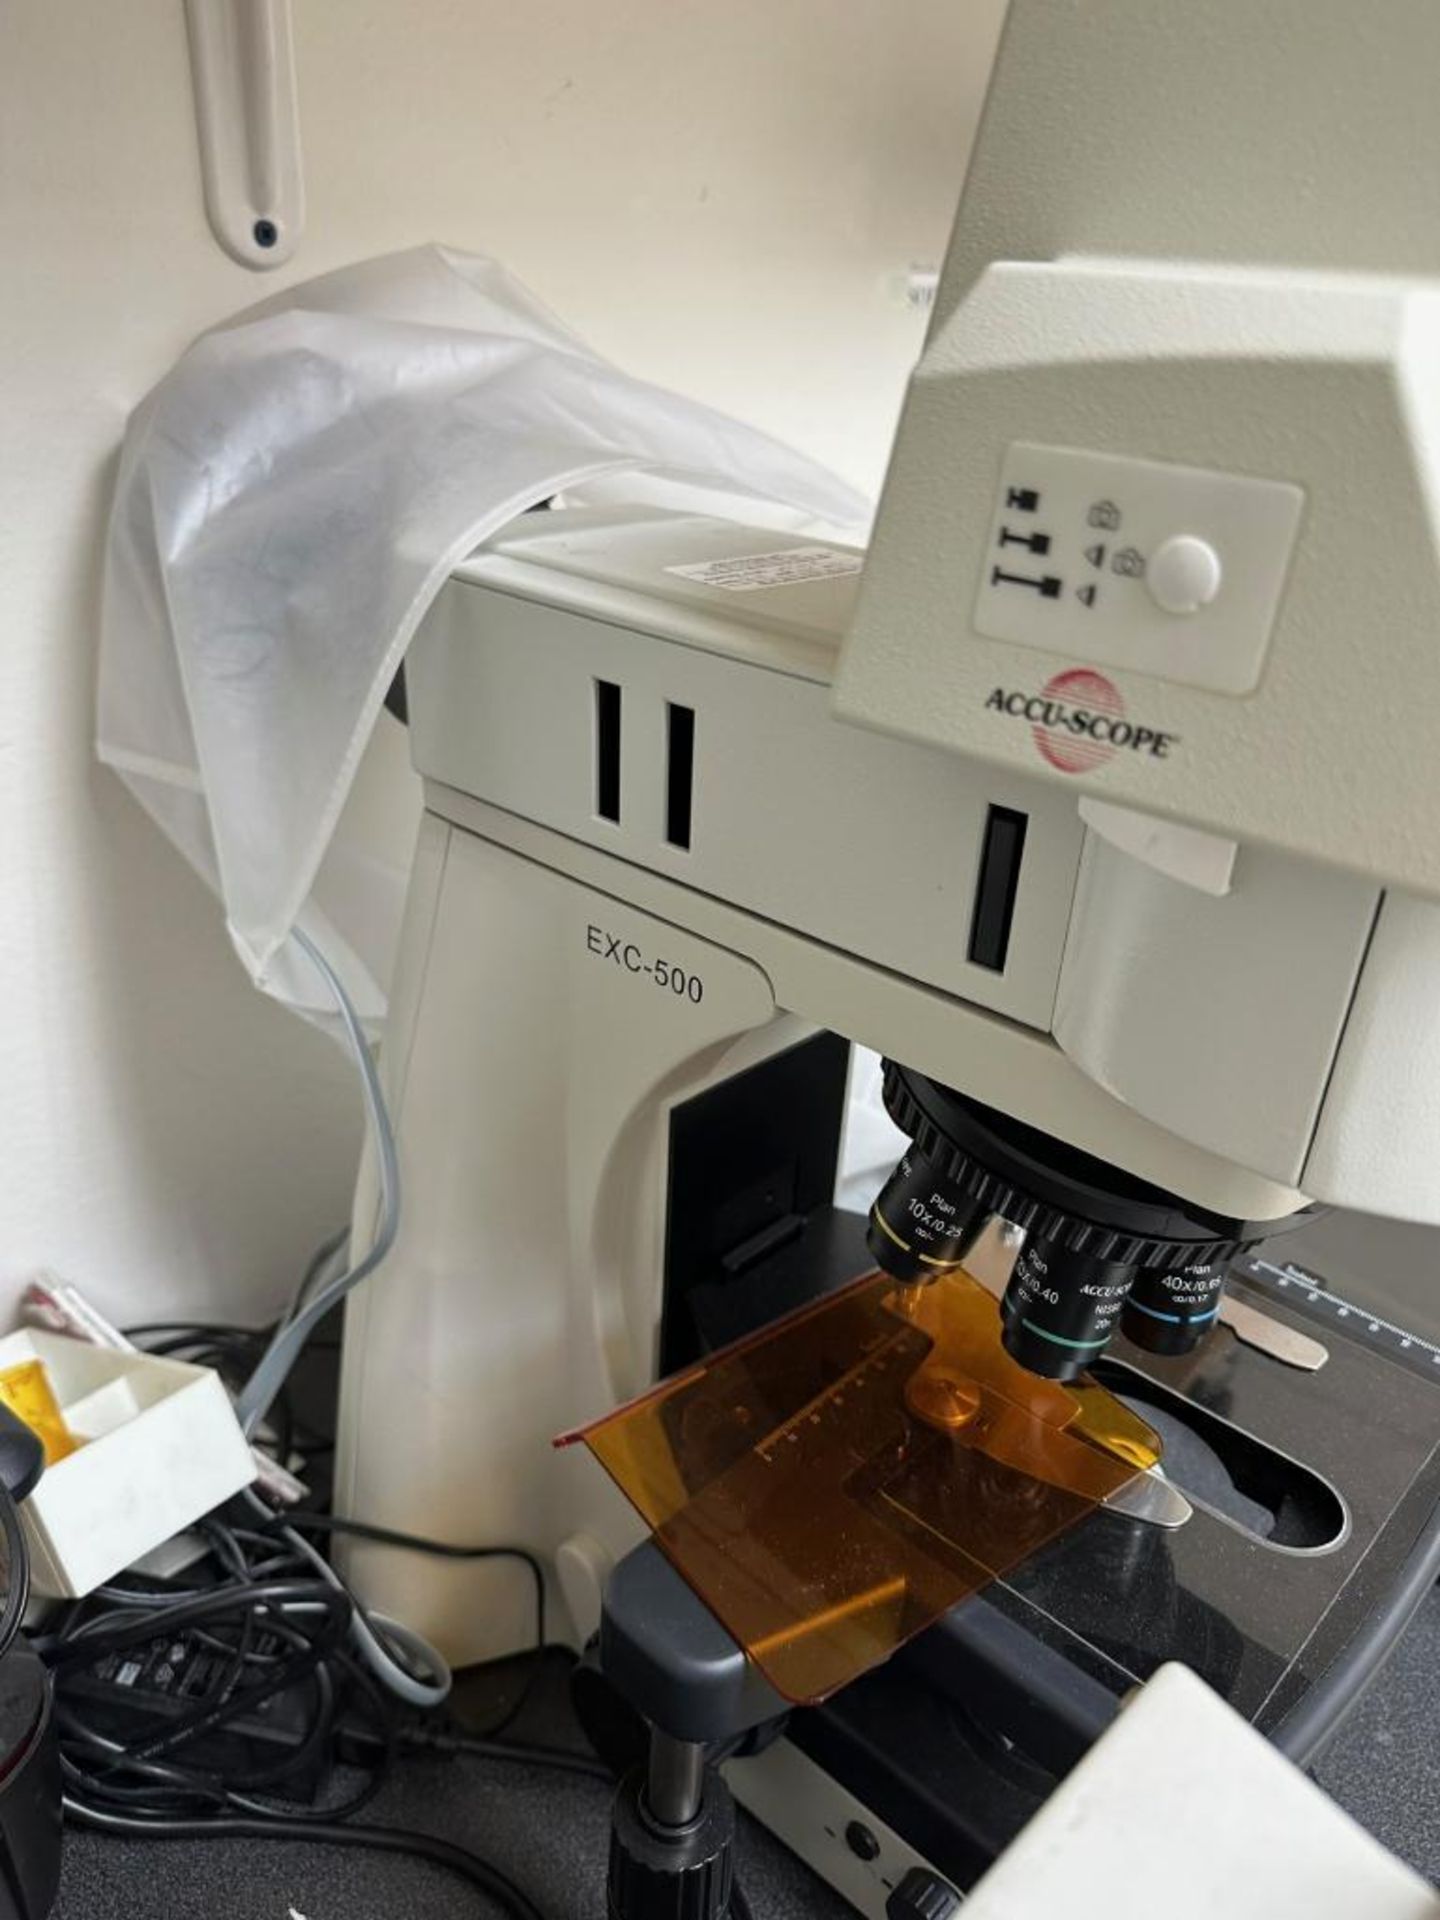 ACCU-SCOPE LAB MICROSCOPE WITH 5 OBJECTIVES - Image 6 of 6